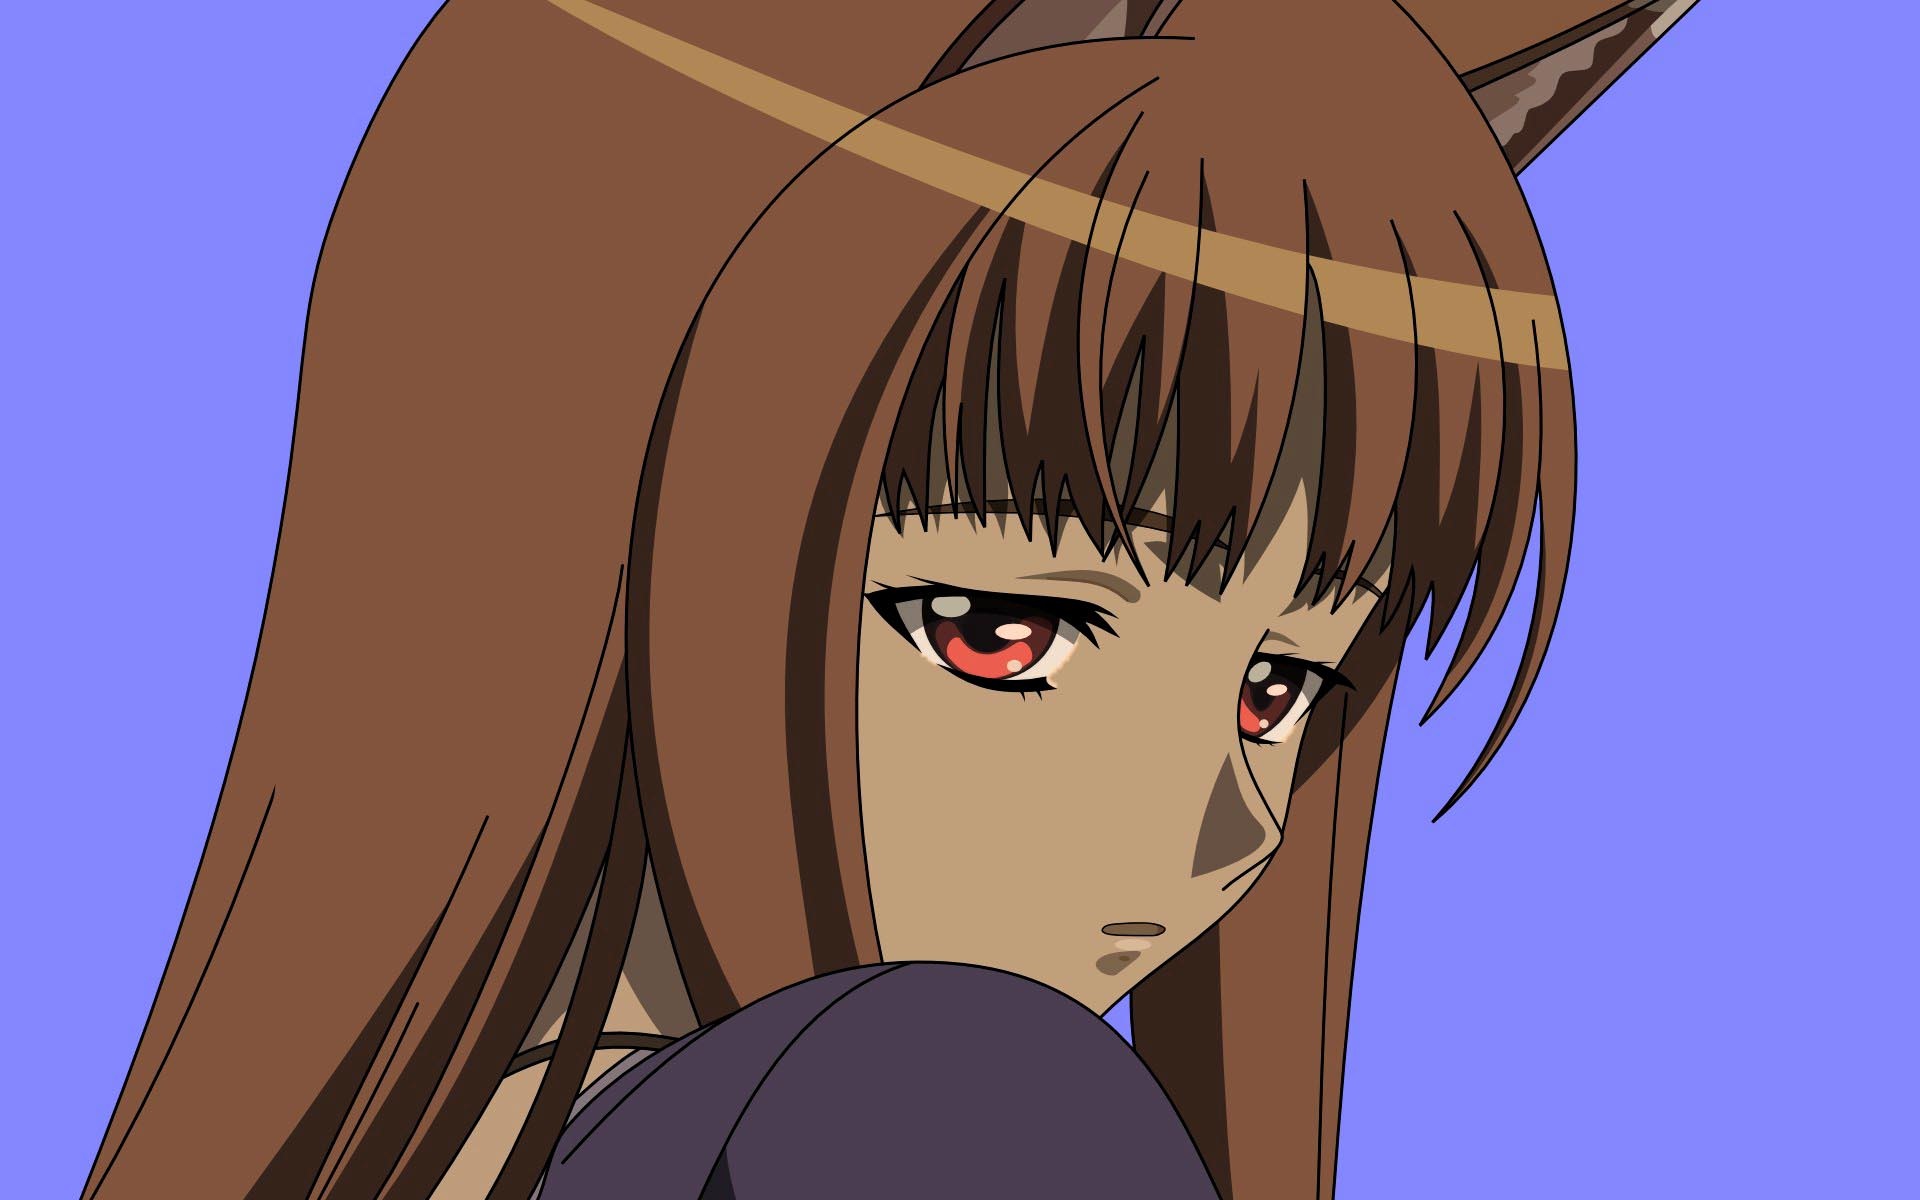 Spice and Wolf HD wallpapers #14 - 1920x1200